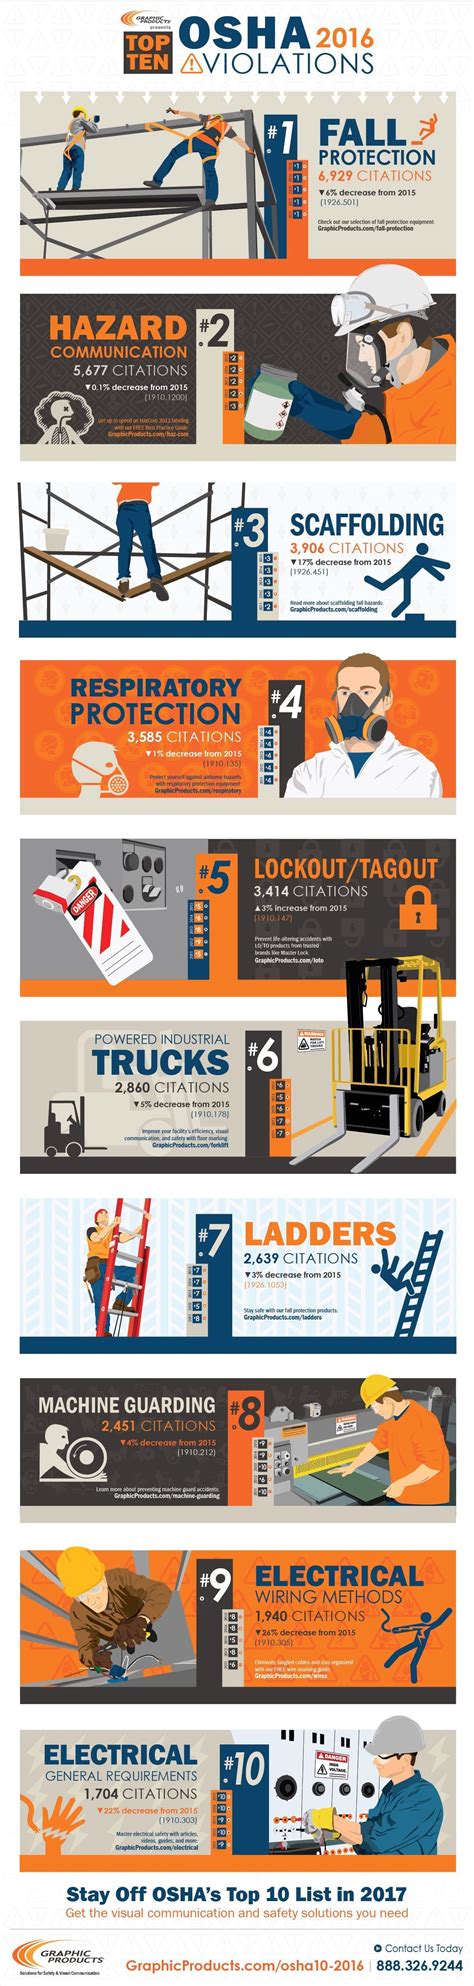 Osha Safety Posters Workplace Safety Safety Posters Health And